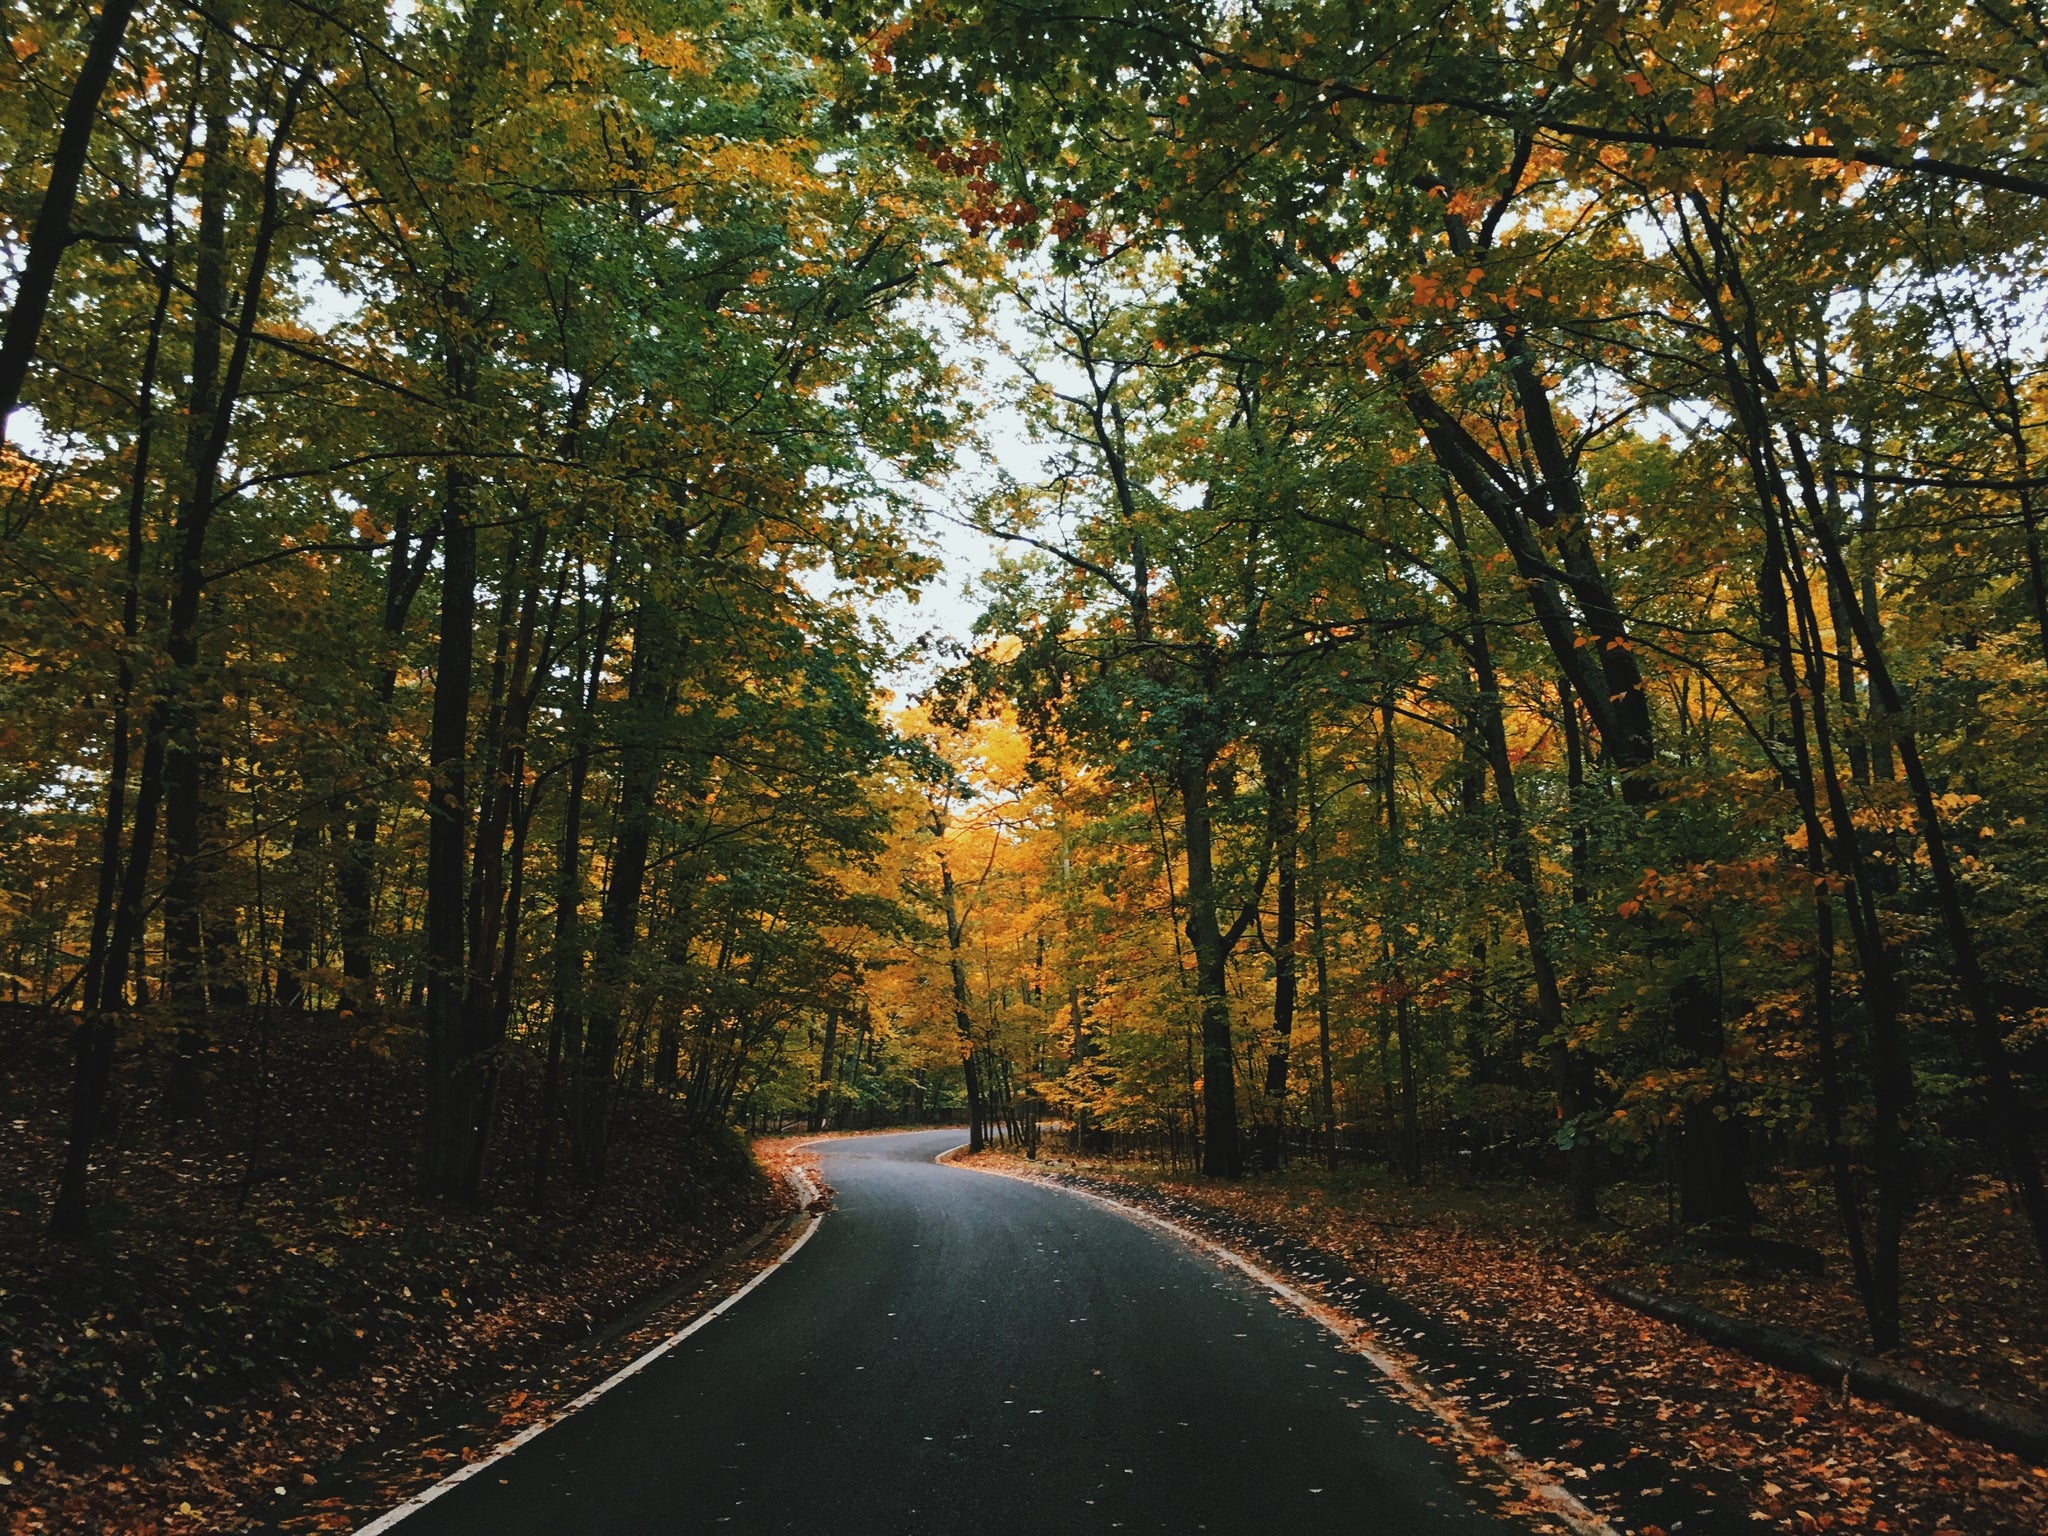 A photo of a winding road surrounded by Michigan's Tunnel of Trees captured by Aaron Burden.